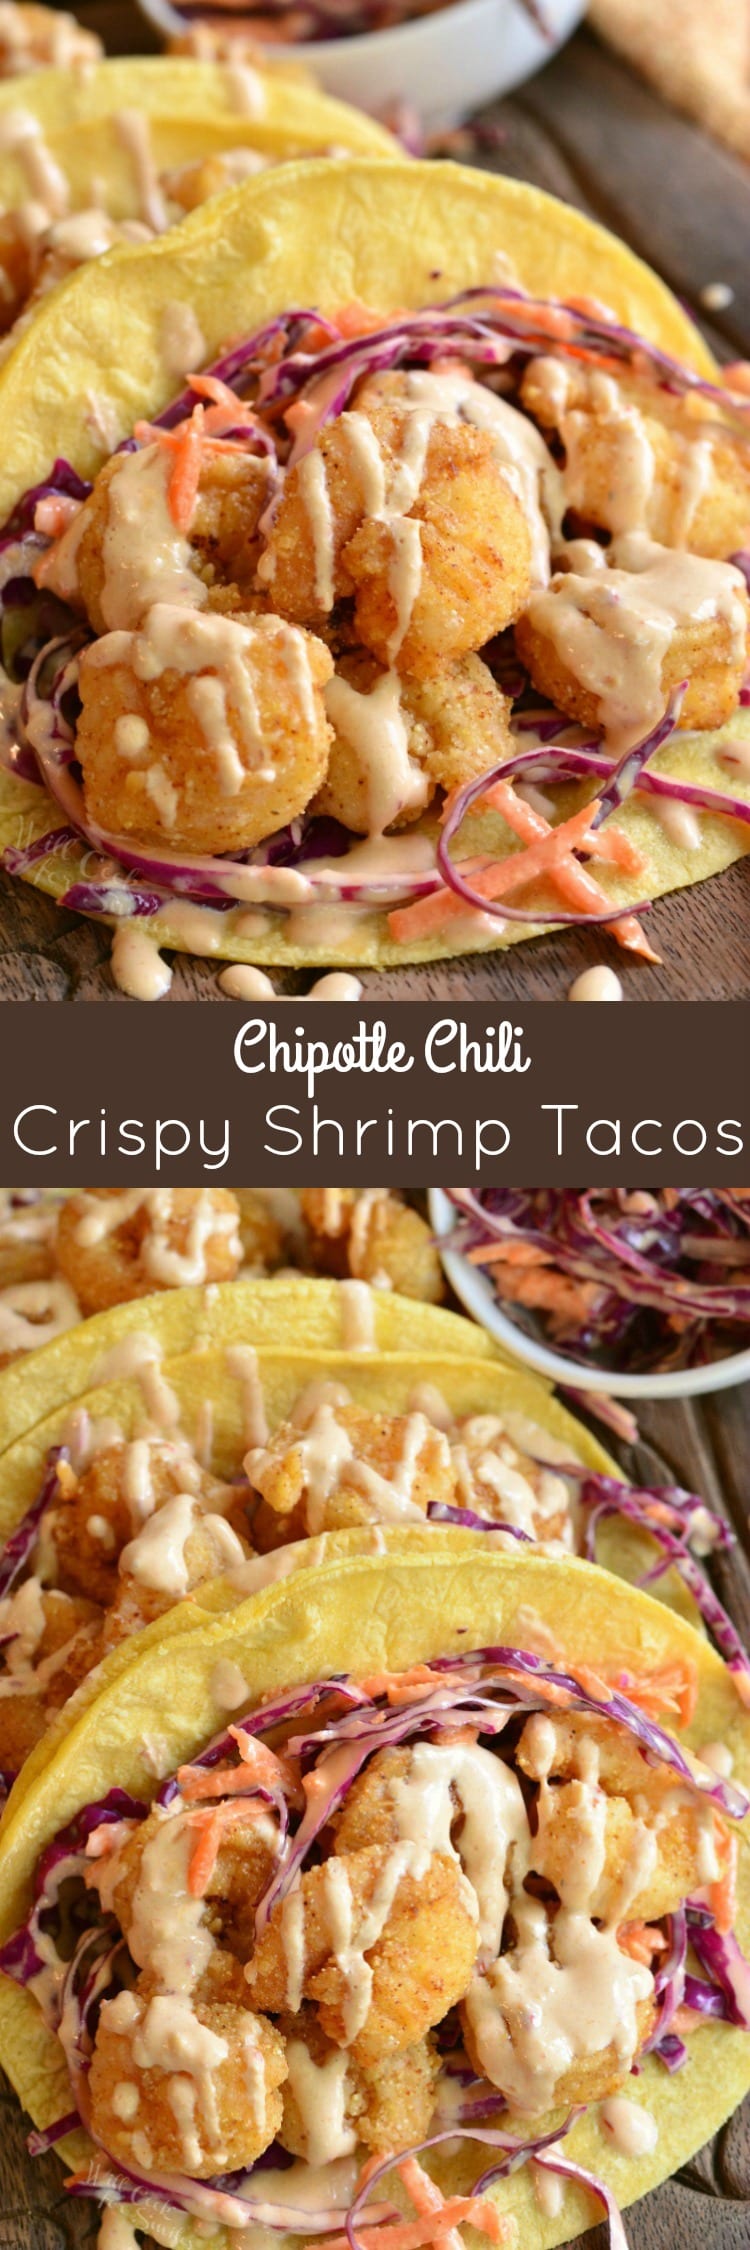 long collage of tacos with crispy shrimp, slaw, and drizzles sauce on top